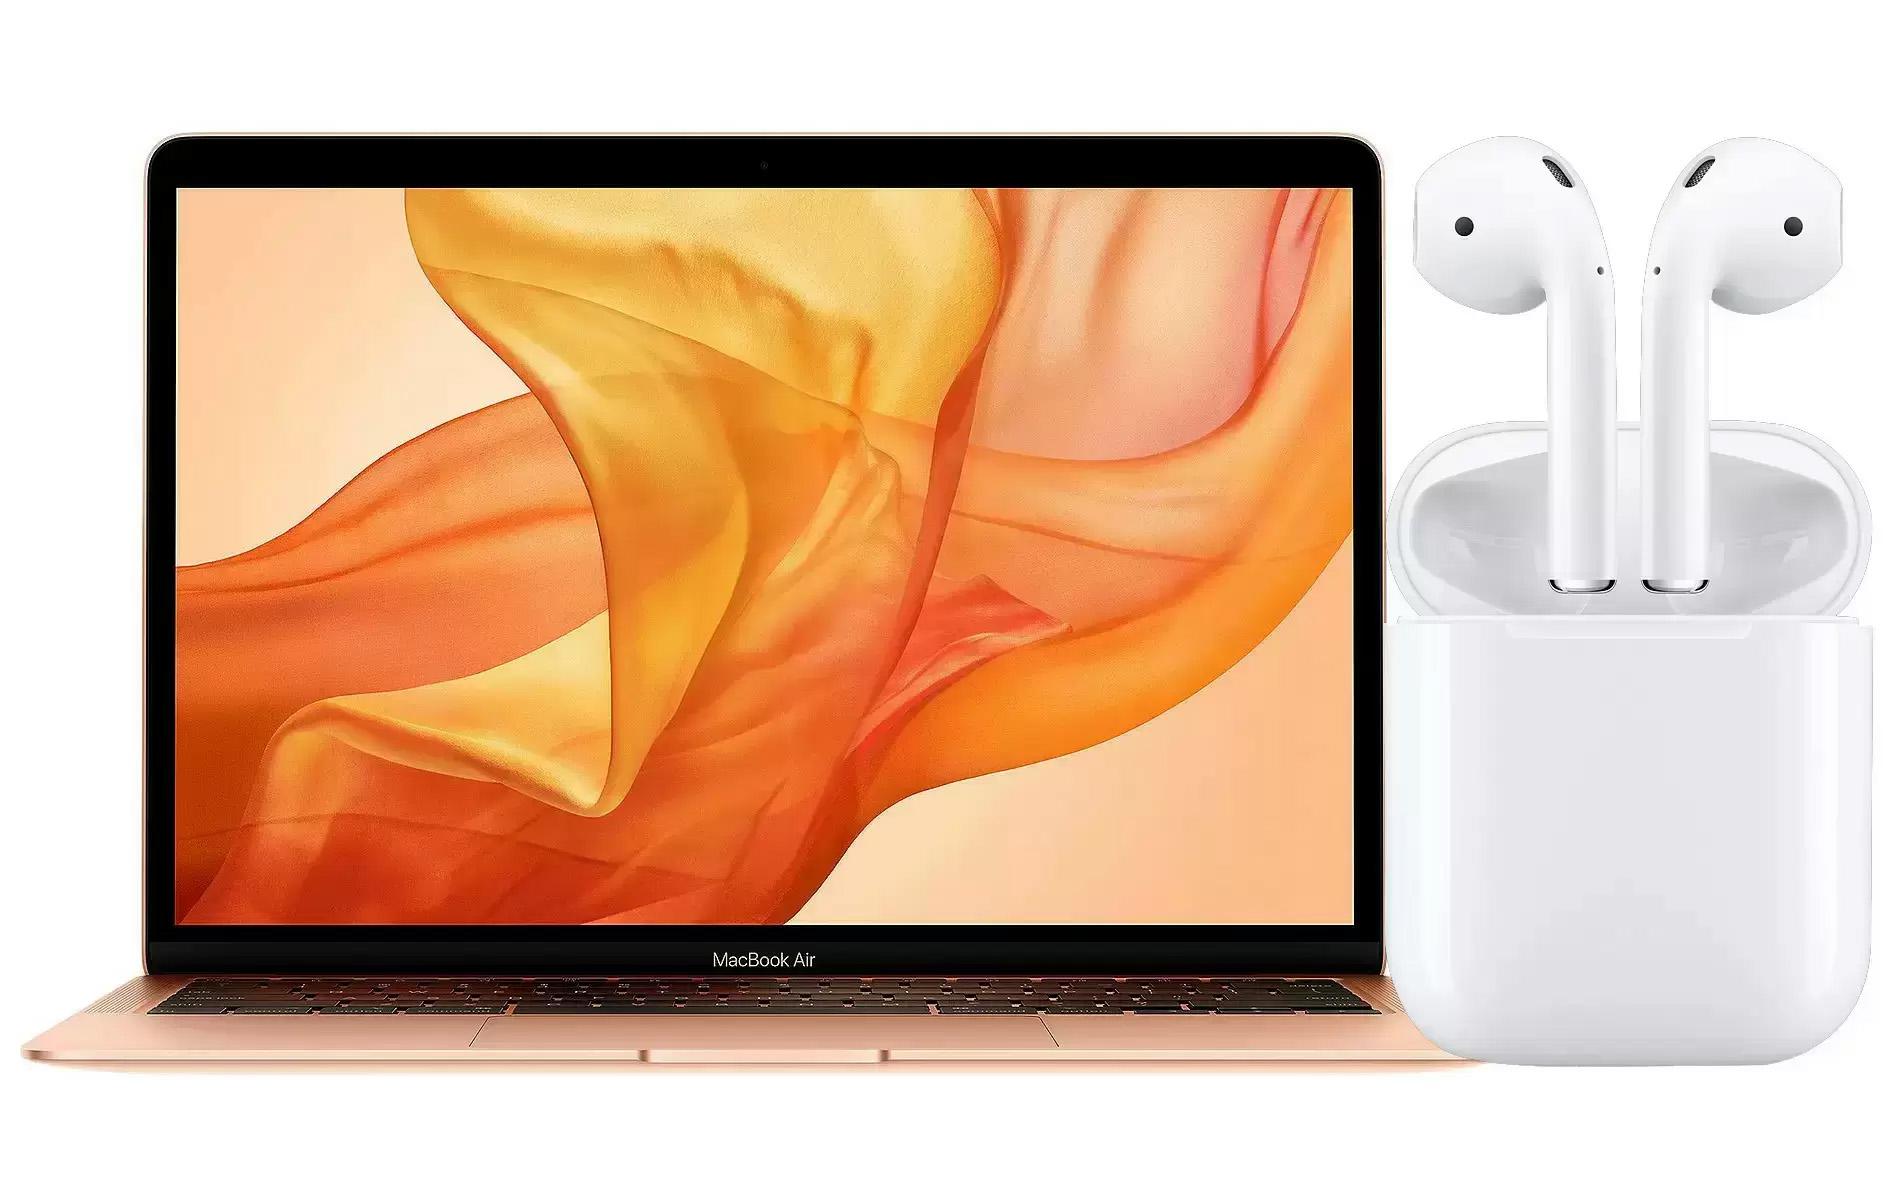 2020 Apple MacBook Air 13.3in Laptop with Apple AirPods for $899 Shipped